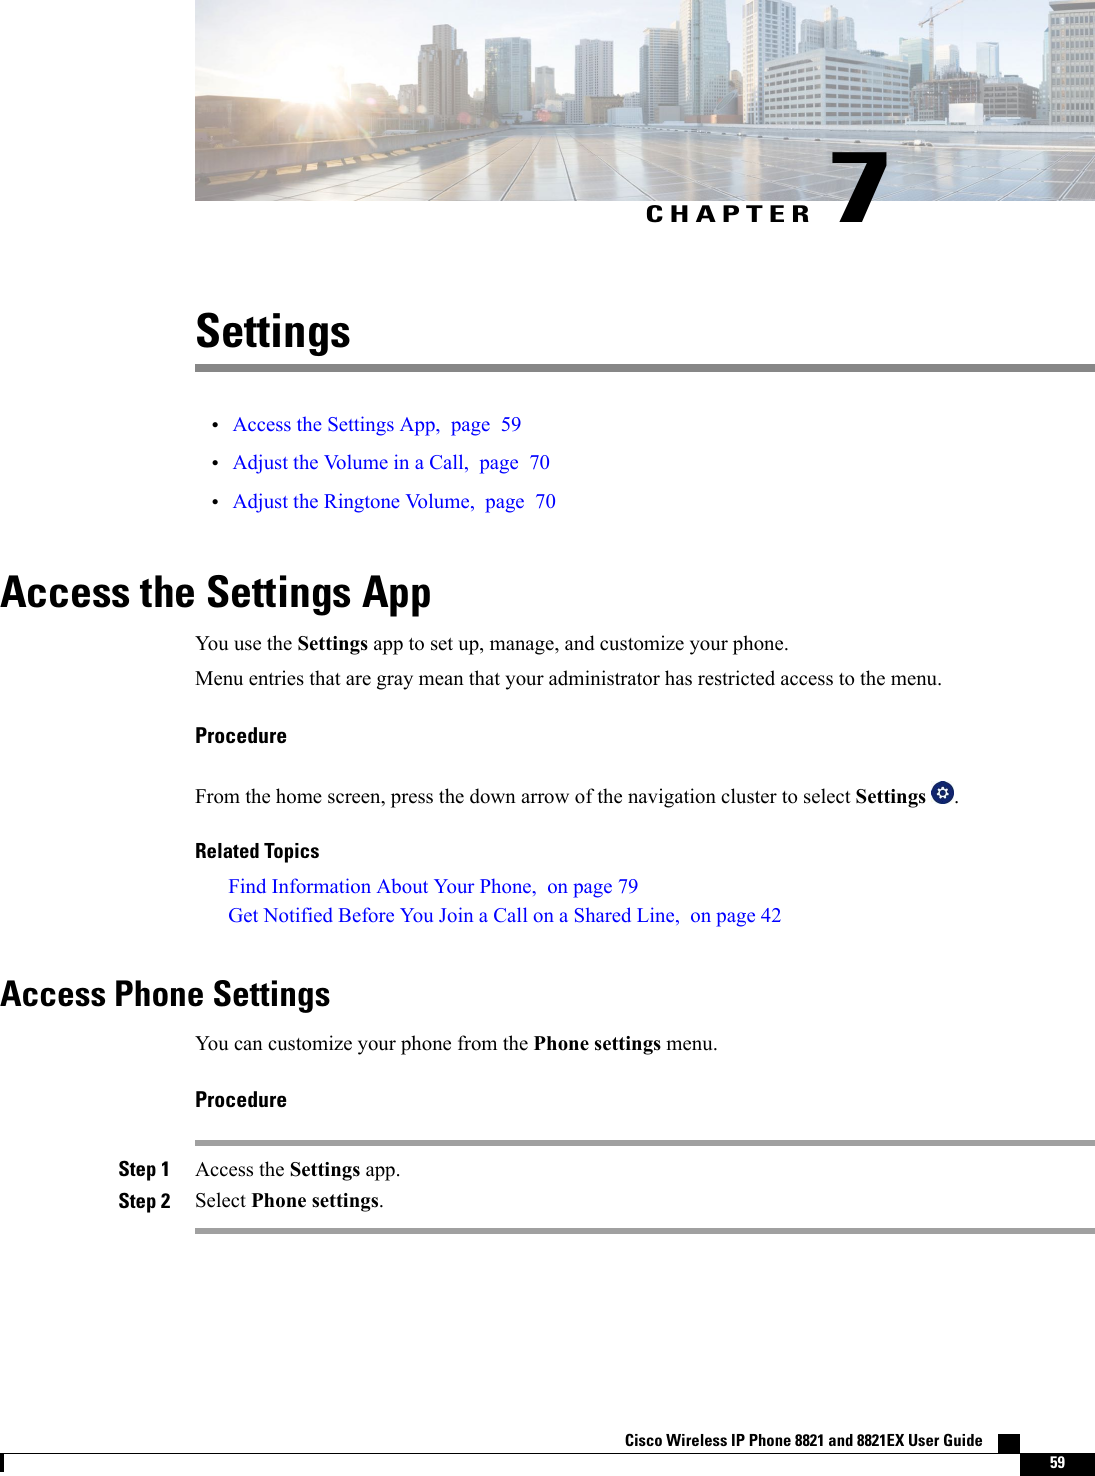 CHAPTER 7Settings•Access the Settings App, page 59•Adjust the Volume in a Call, page 70•Adjust the Ringtone Volume, page 70Access the Settings AppYou use the Settings app to set up, manage, and customize your phone.Menu entries that are gray mean that your administrator has restricted access to the menu.ProcedureFrom the home screen, press the down arrow of the navigation cluster to select Settings .Related TopicsFind Information About Your Phone, on page 79Get Notified Before You Join a Call on a Shared Line, on page 42Access Phone SettingsYou can customize your phone from the Phone settings menu.ProcedureStep 1 Access the Settings app.Step 2 Select Phone settings.Cisco Wireless IP Phone 8821 and 8821EX User Guide    59